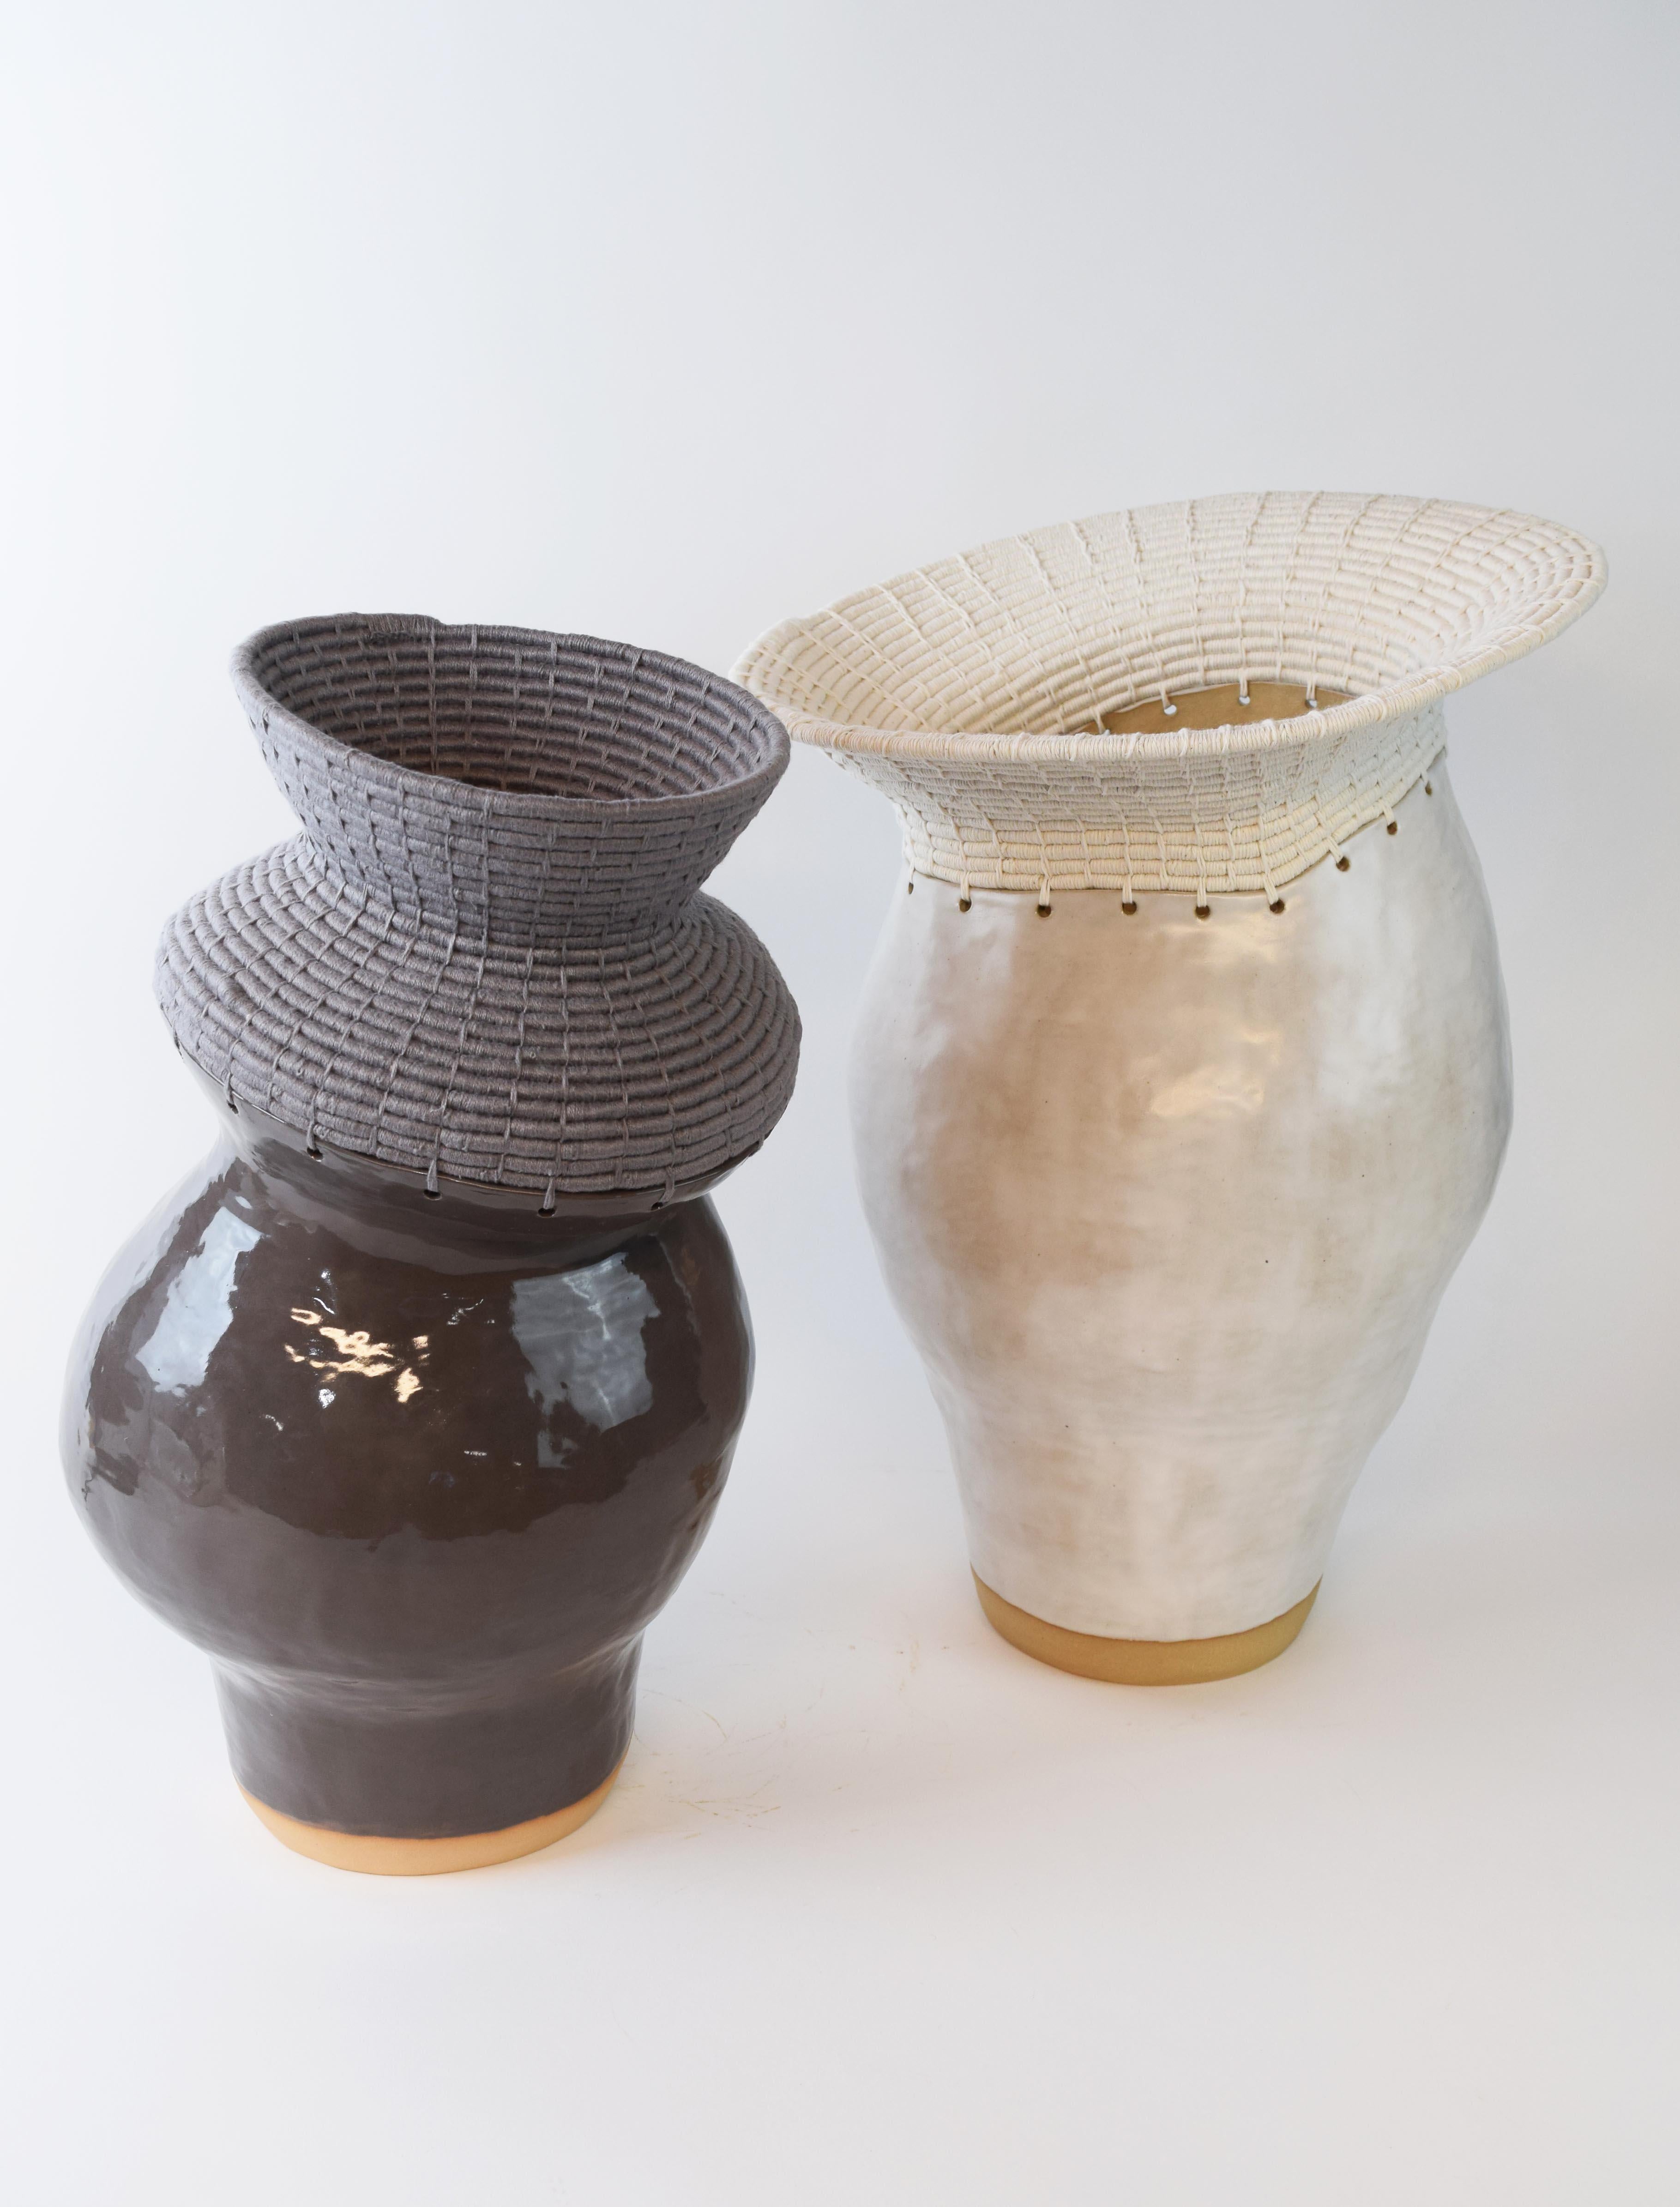 Contemporary One of a Kind Asymmetrical Ceramic Vessel #771, White Glaze and Woven Cotton For Sale